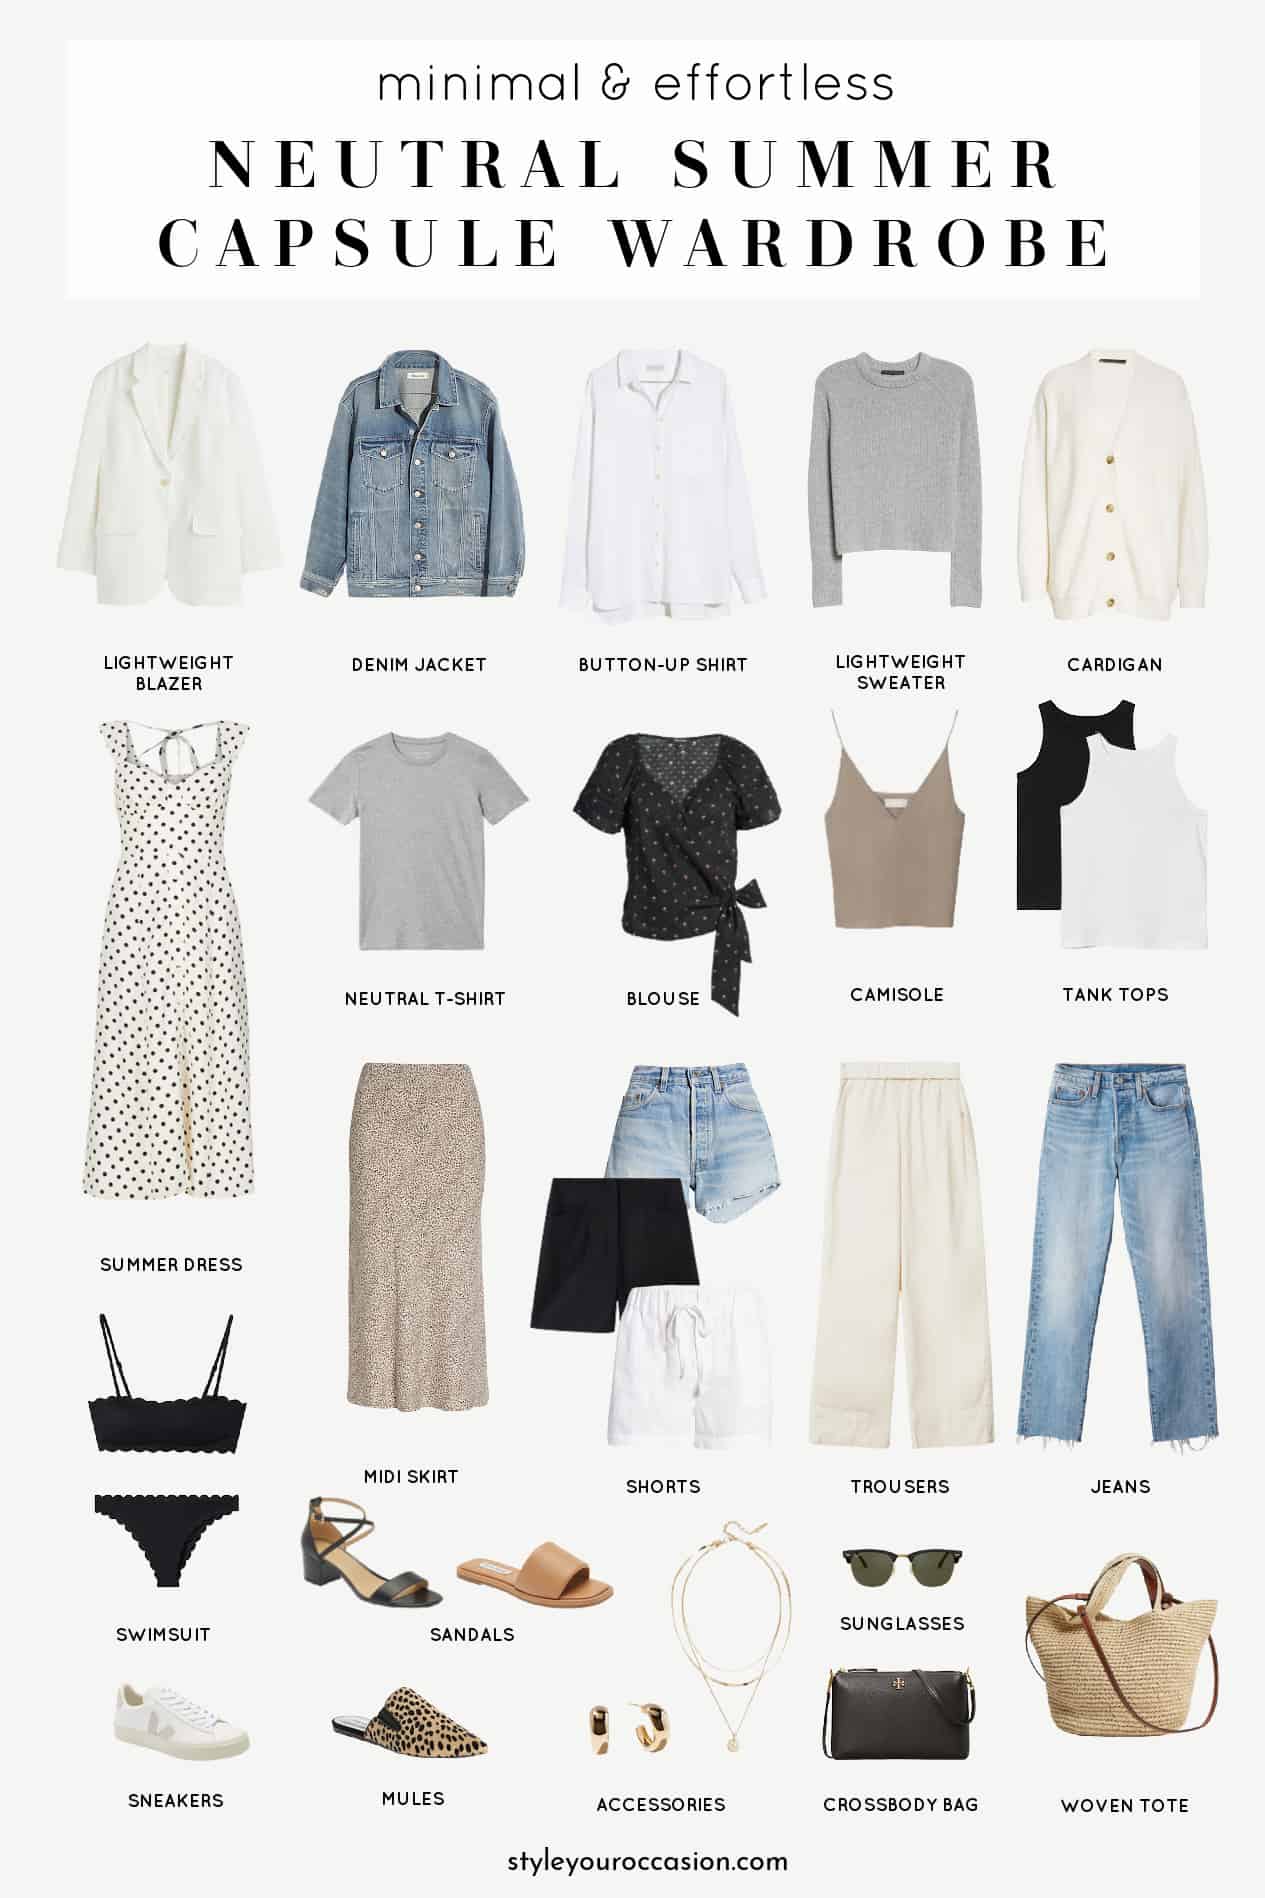 How to Start Adding Colour to Your Summer Capsule Wardrobe - livelovesara